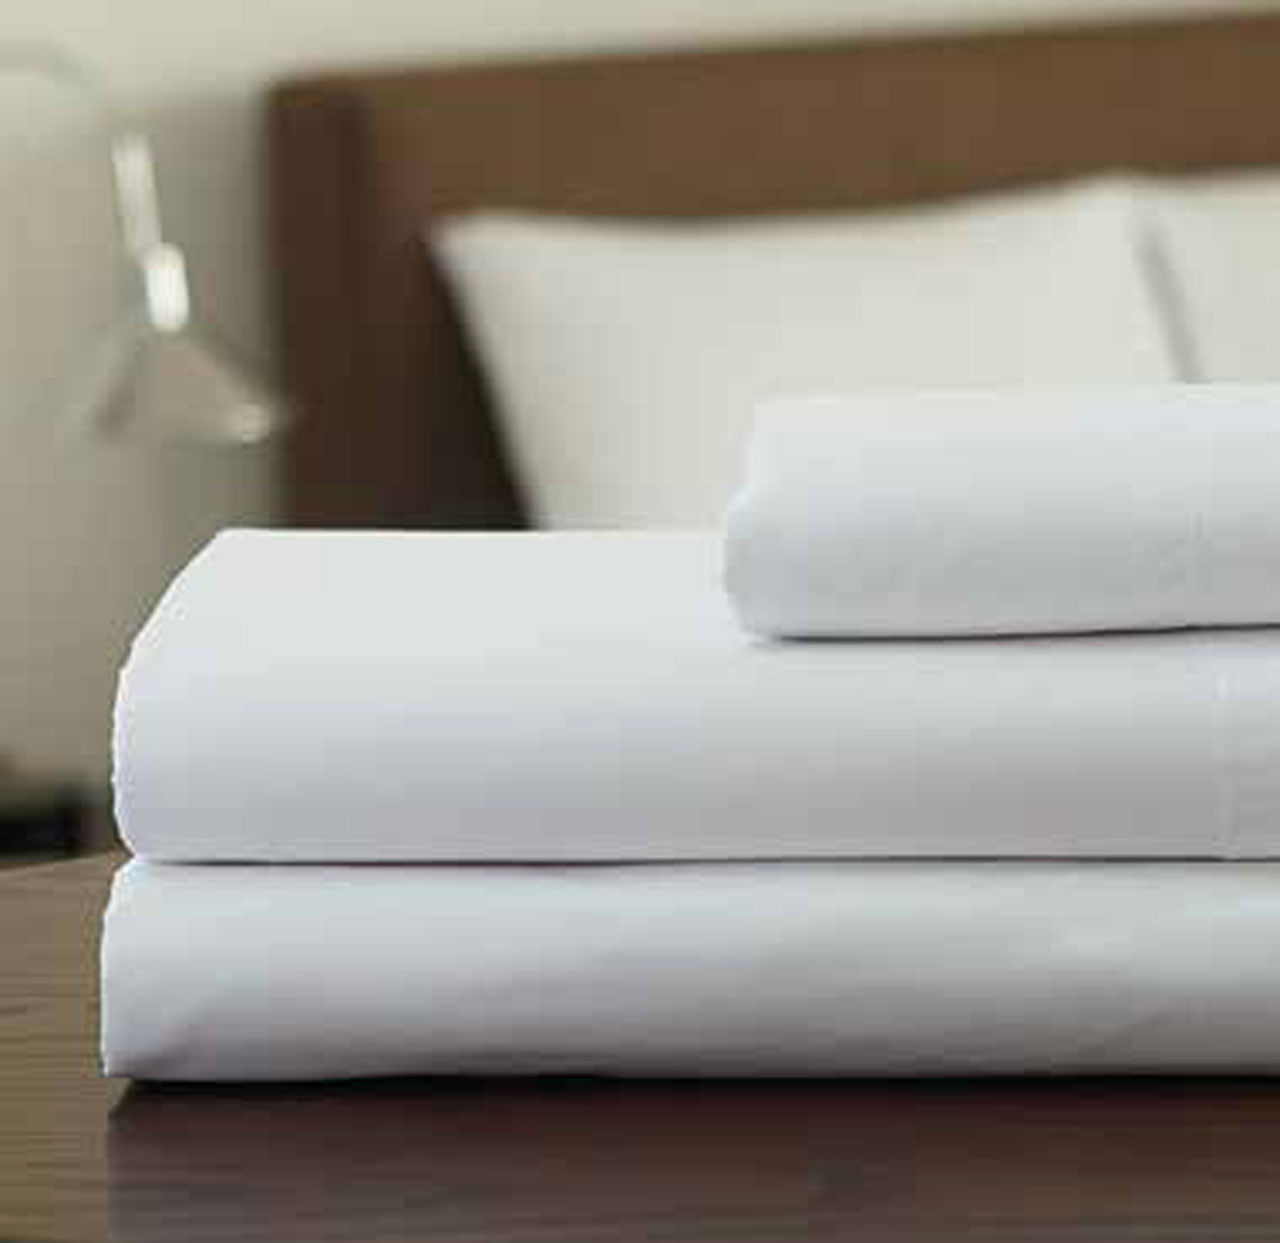 Does the Wellington by Welspun Hospitality Solutions have features to identify sheet size?